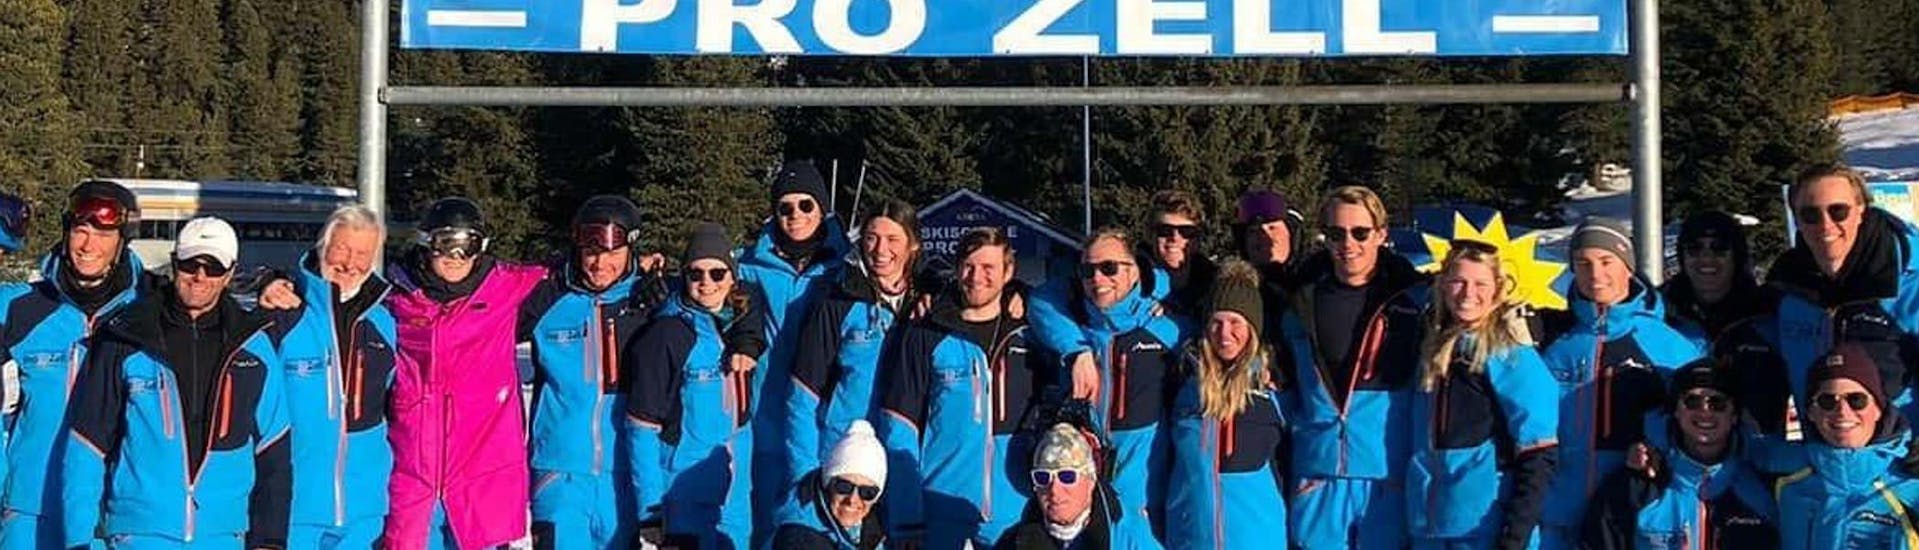 The ski instructors from the ski school Skischule Pro Zell in Zell am Ziller are smiling at the camera in a group photo.